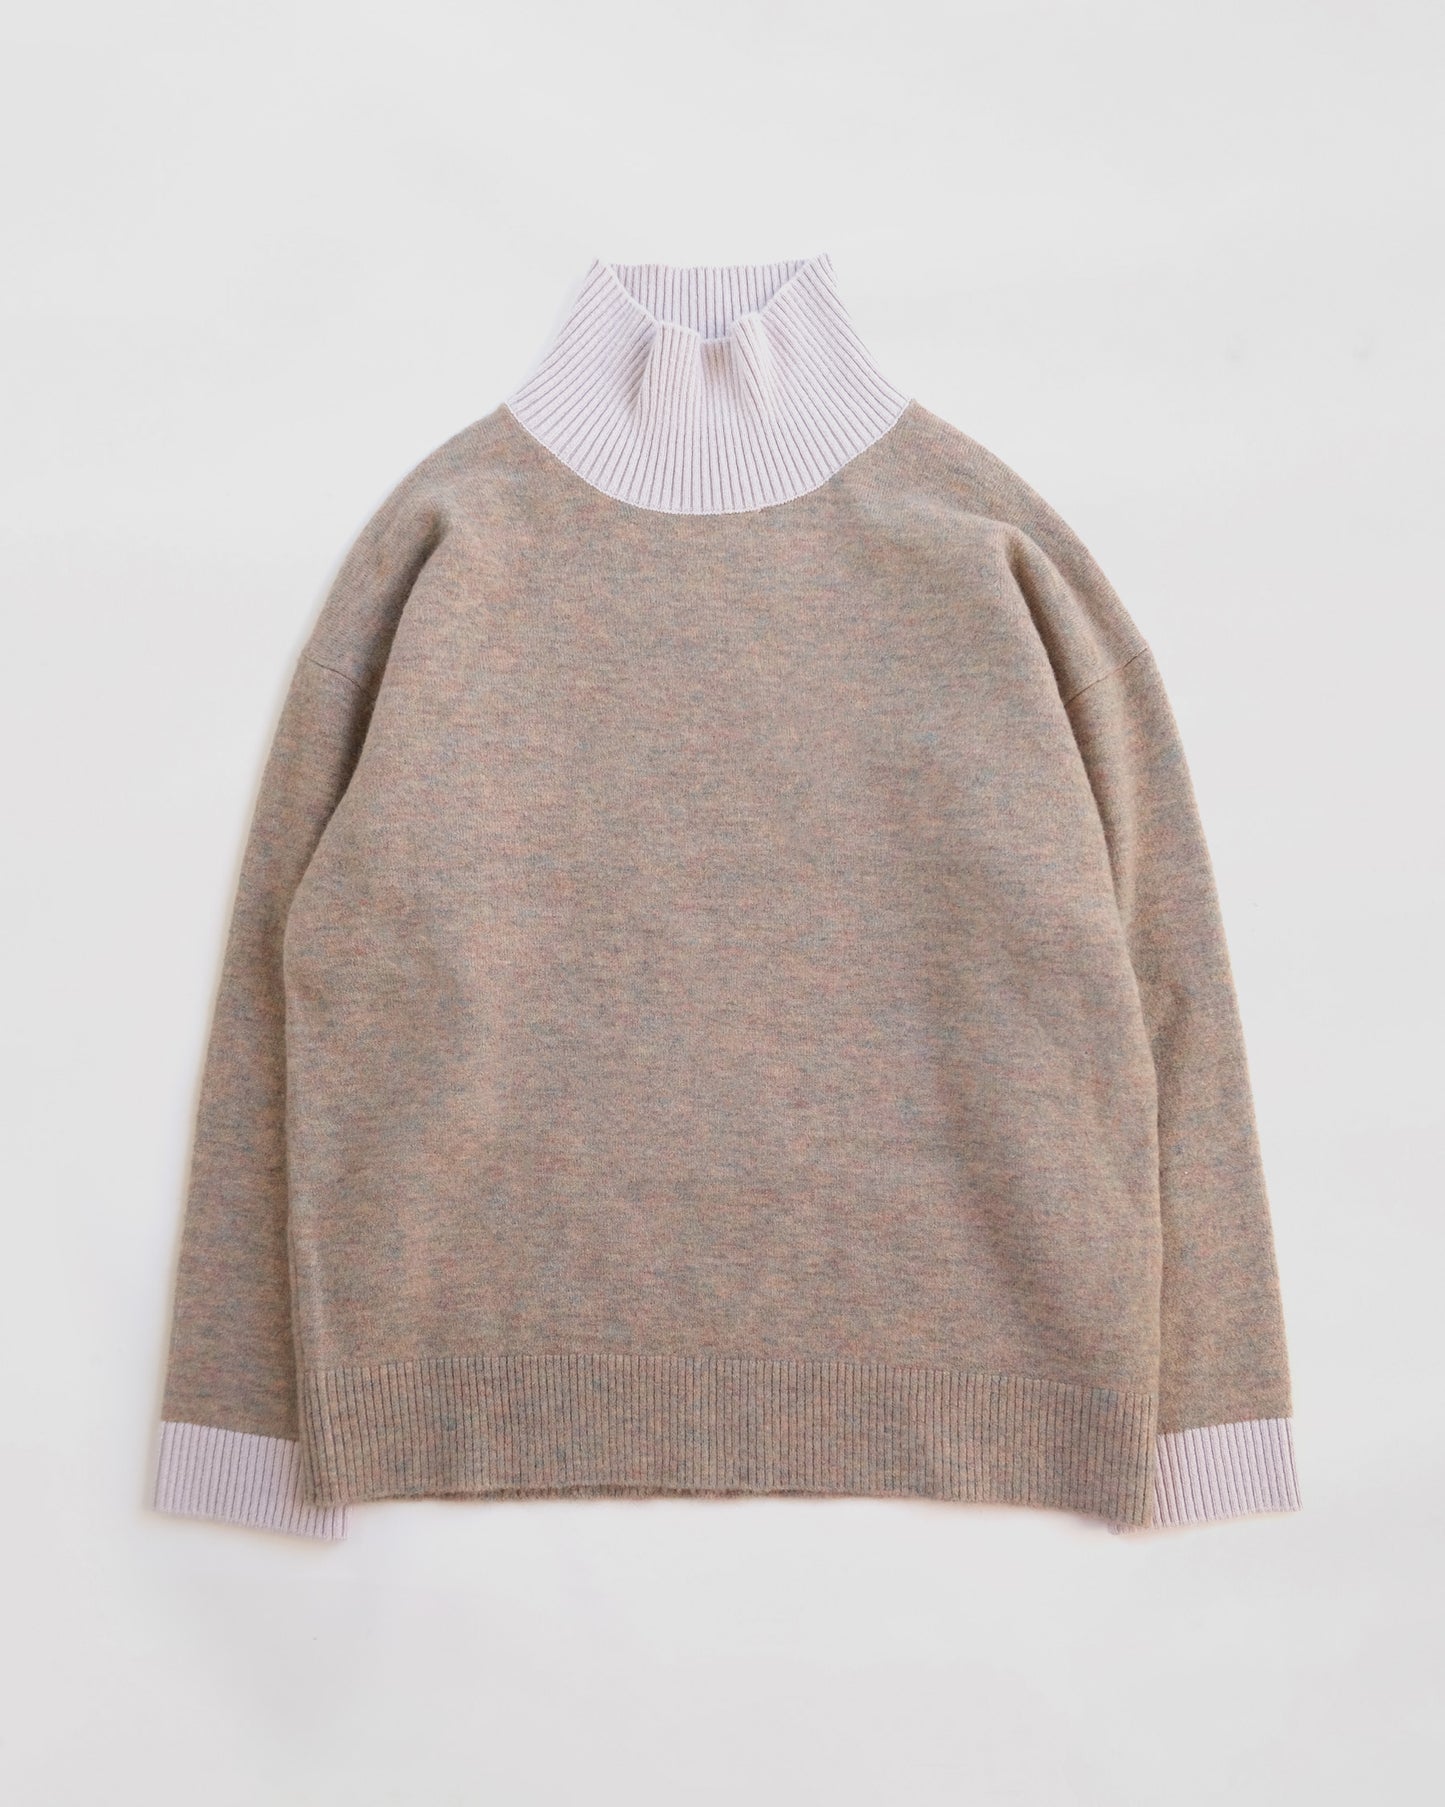 404 High Neck Bicolor Sweater by RYE TENDER - Beige×Off White